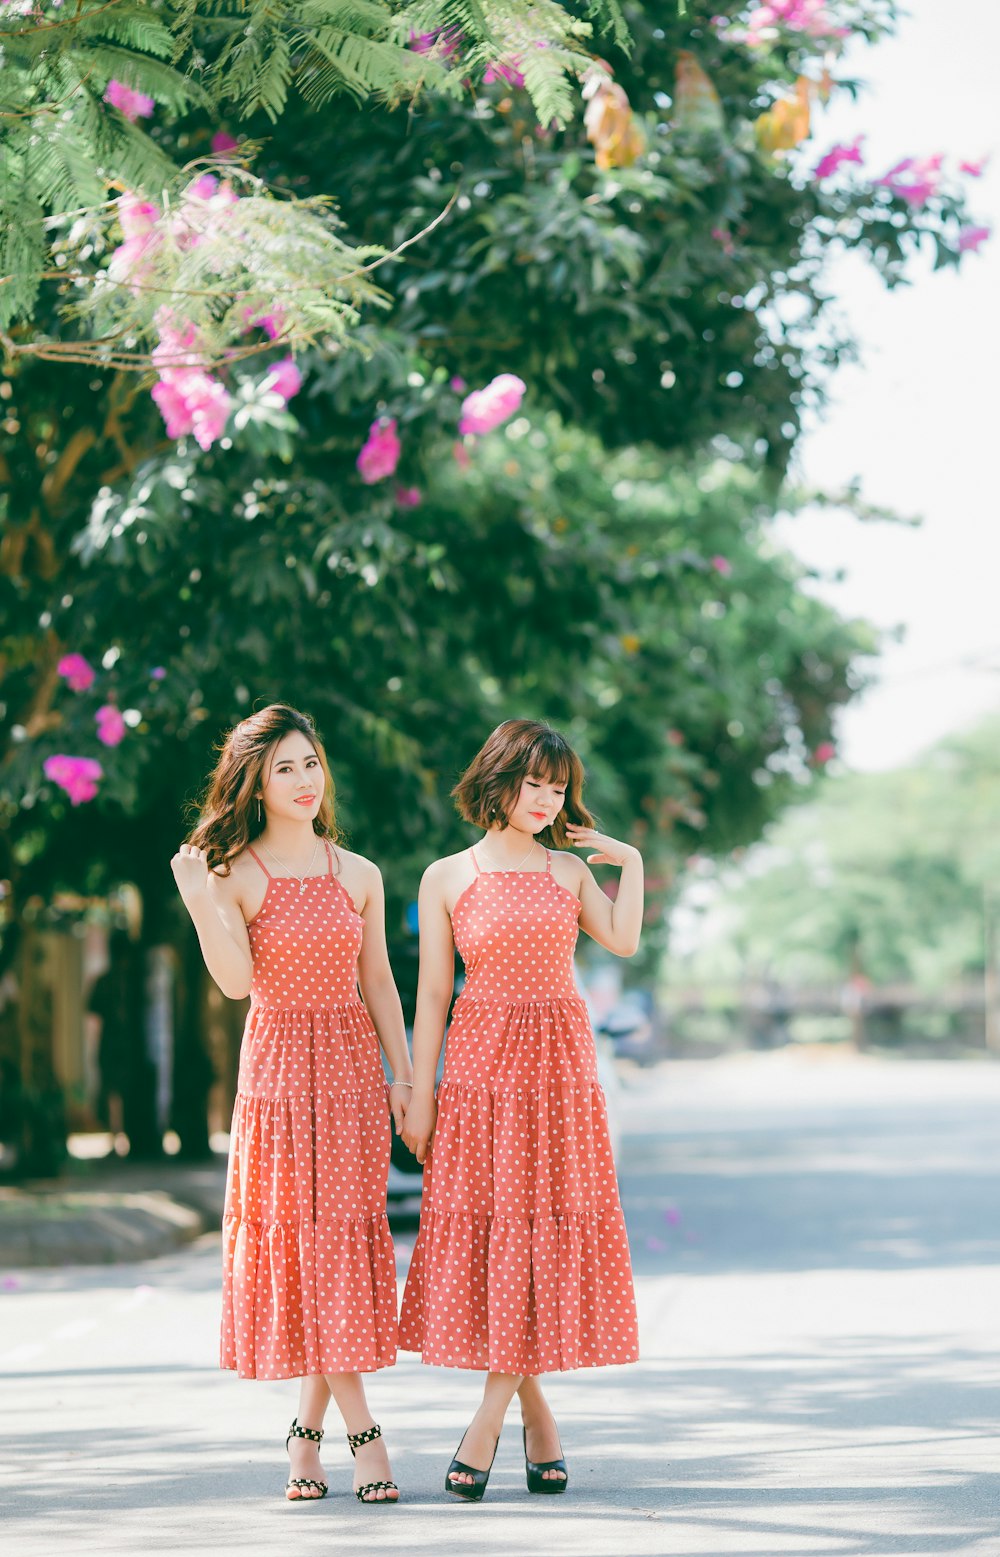 two women wearing red-and-white polka dot dresses standing on road near pink petaled flowers during daytime